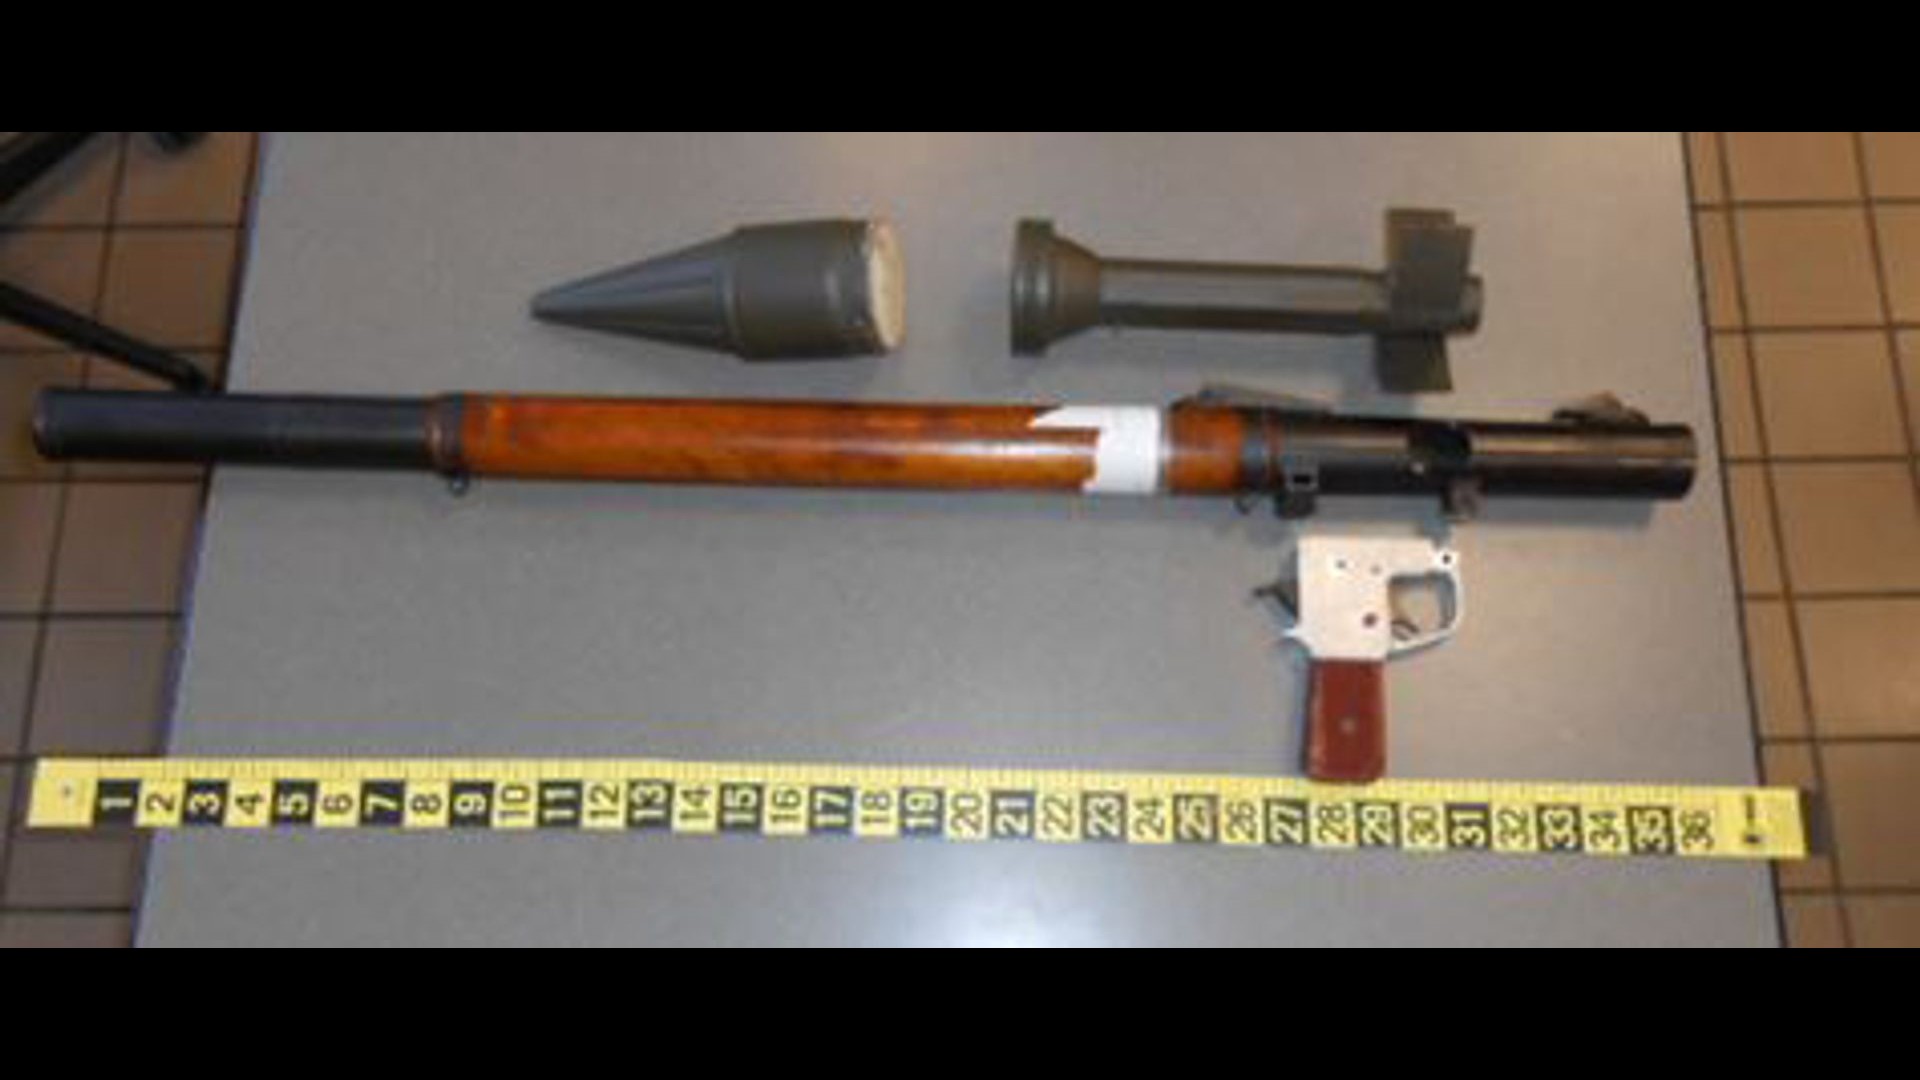 TSA Workers Find Grenade Launcher in Man's Luggage at Lehigh Valley International Airport